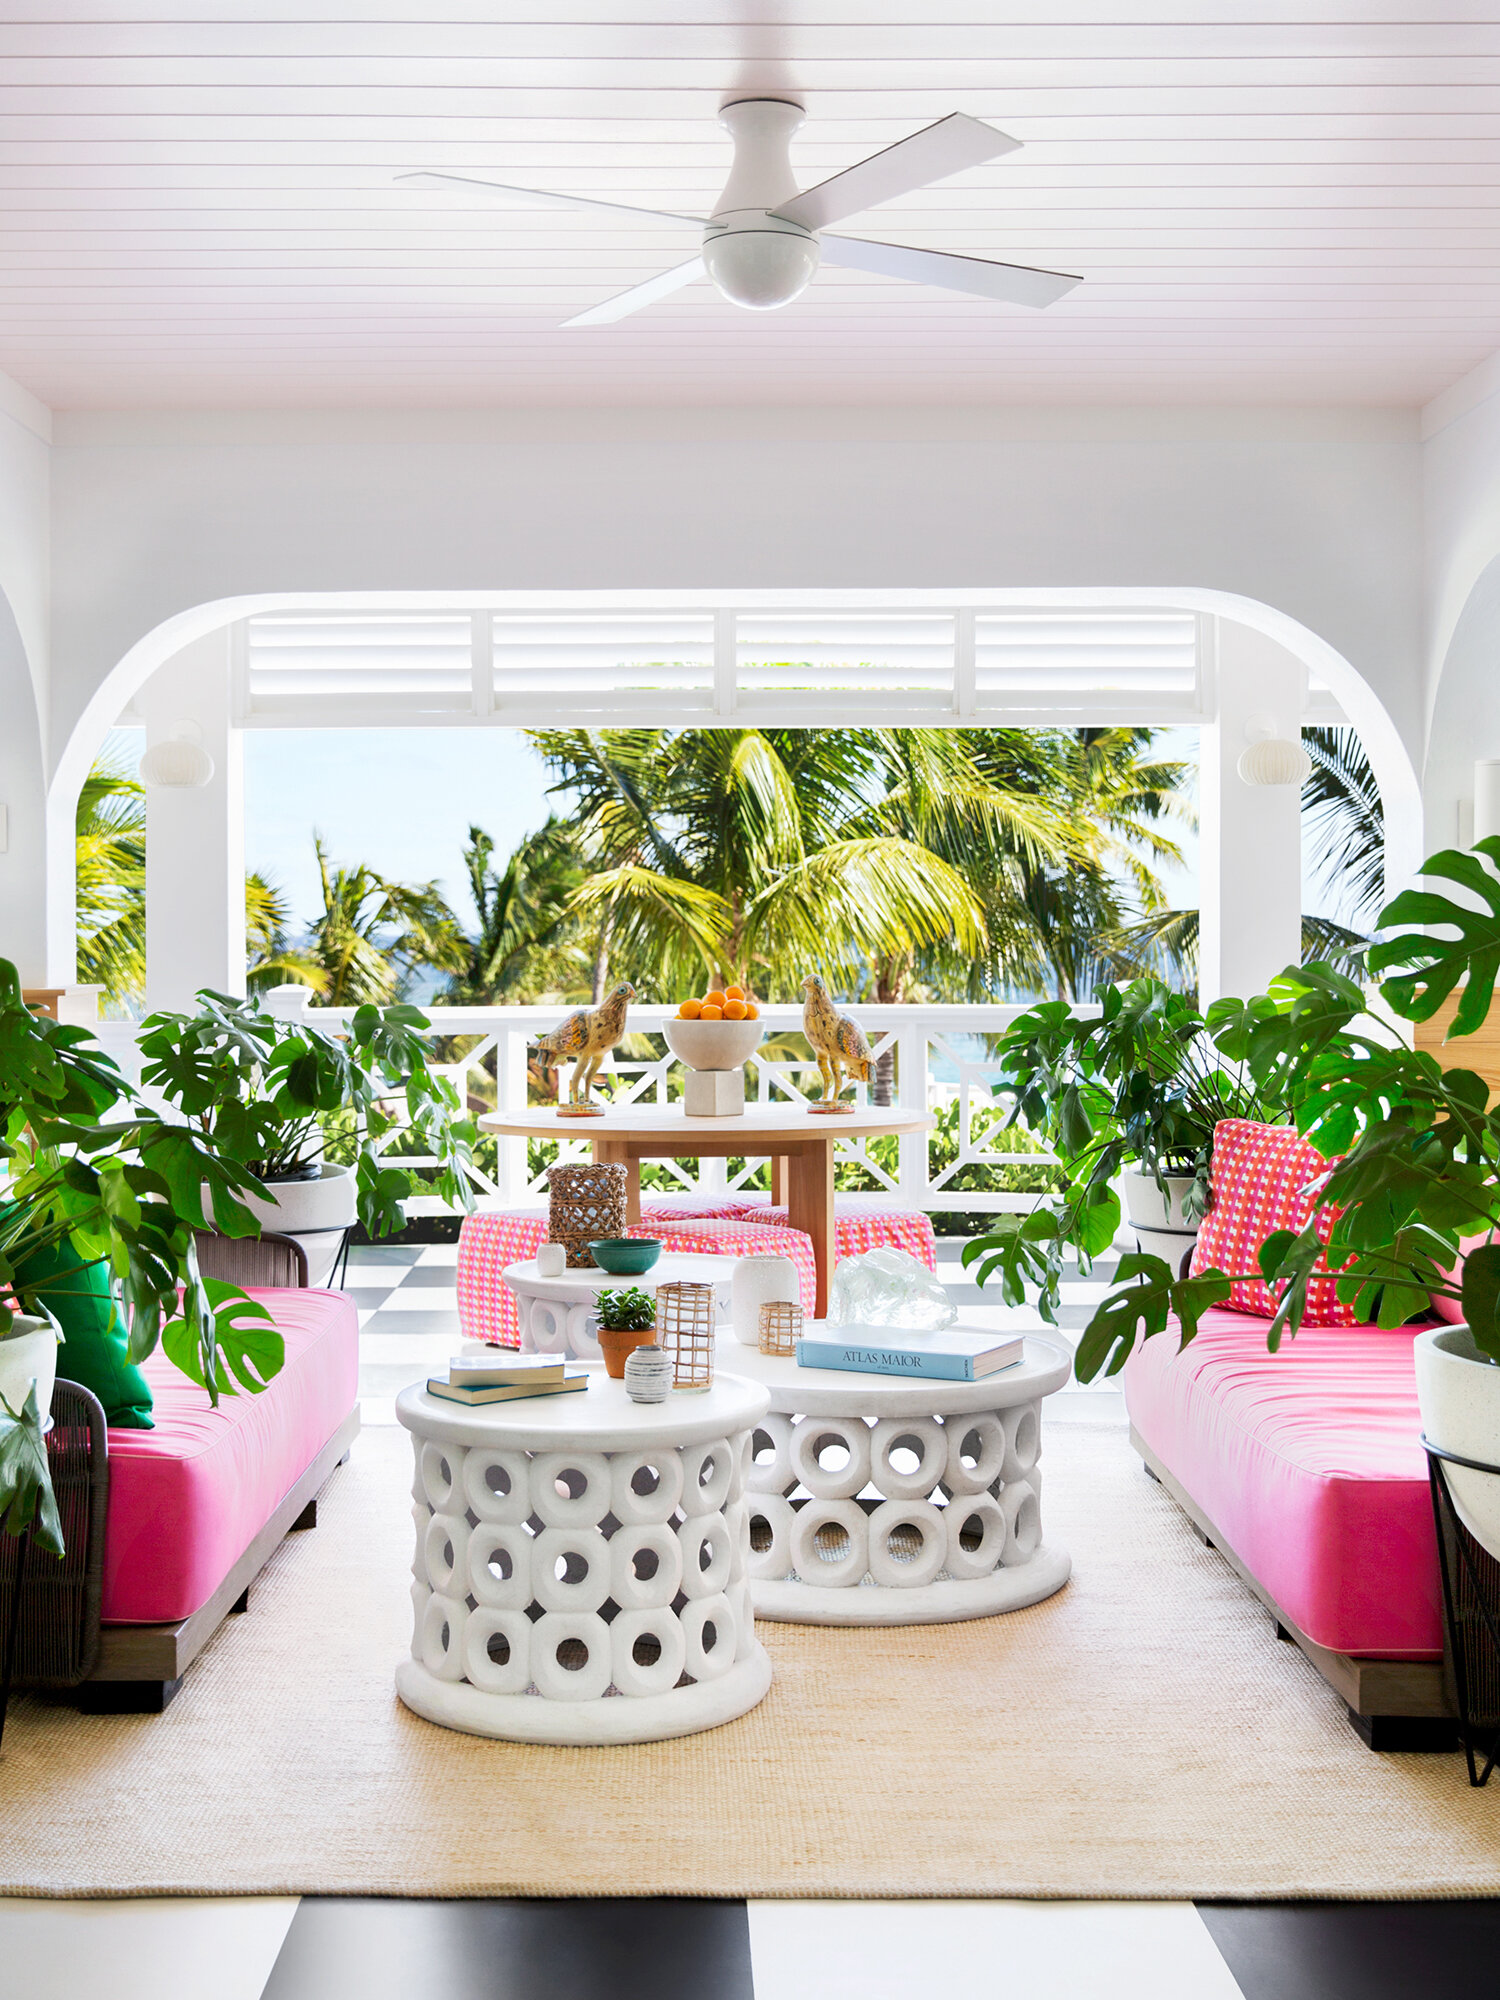 Interior Design by Eddie Lee for Coral Sands Hotel | House Beautiful